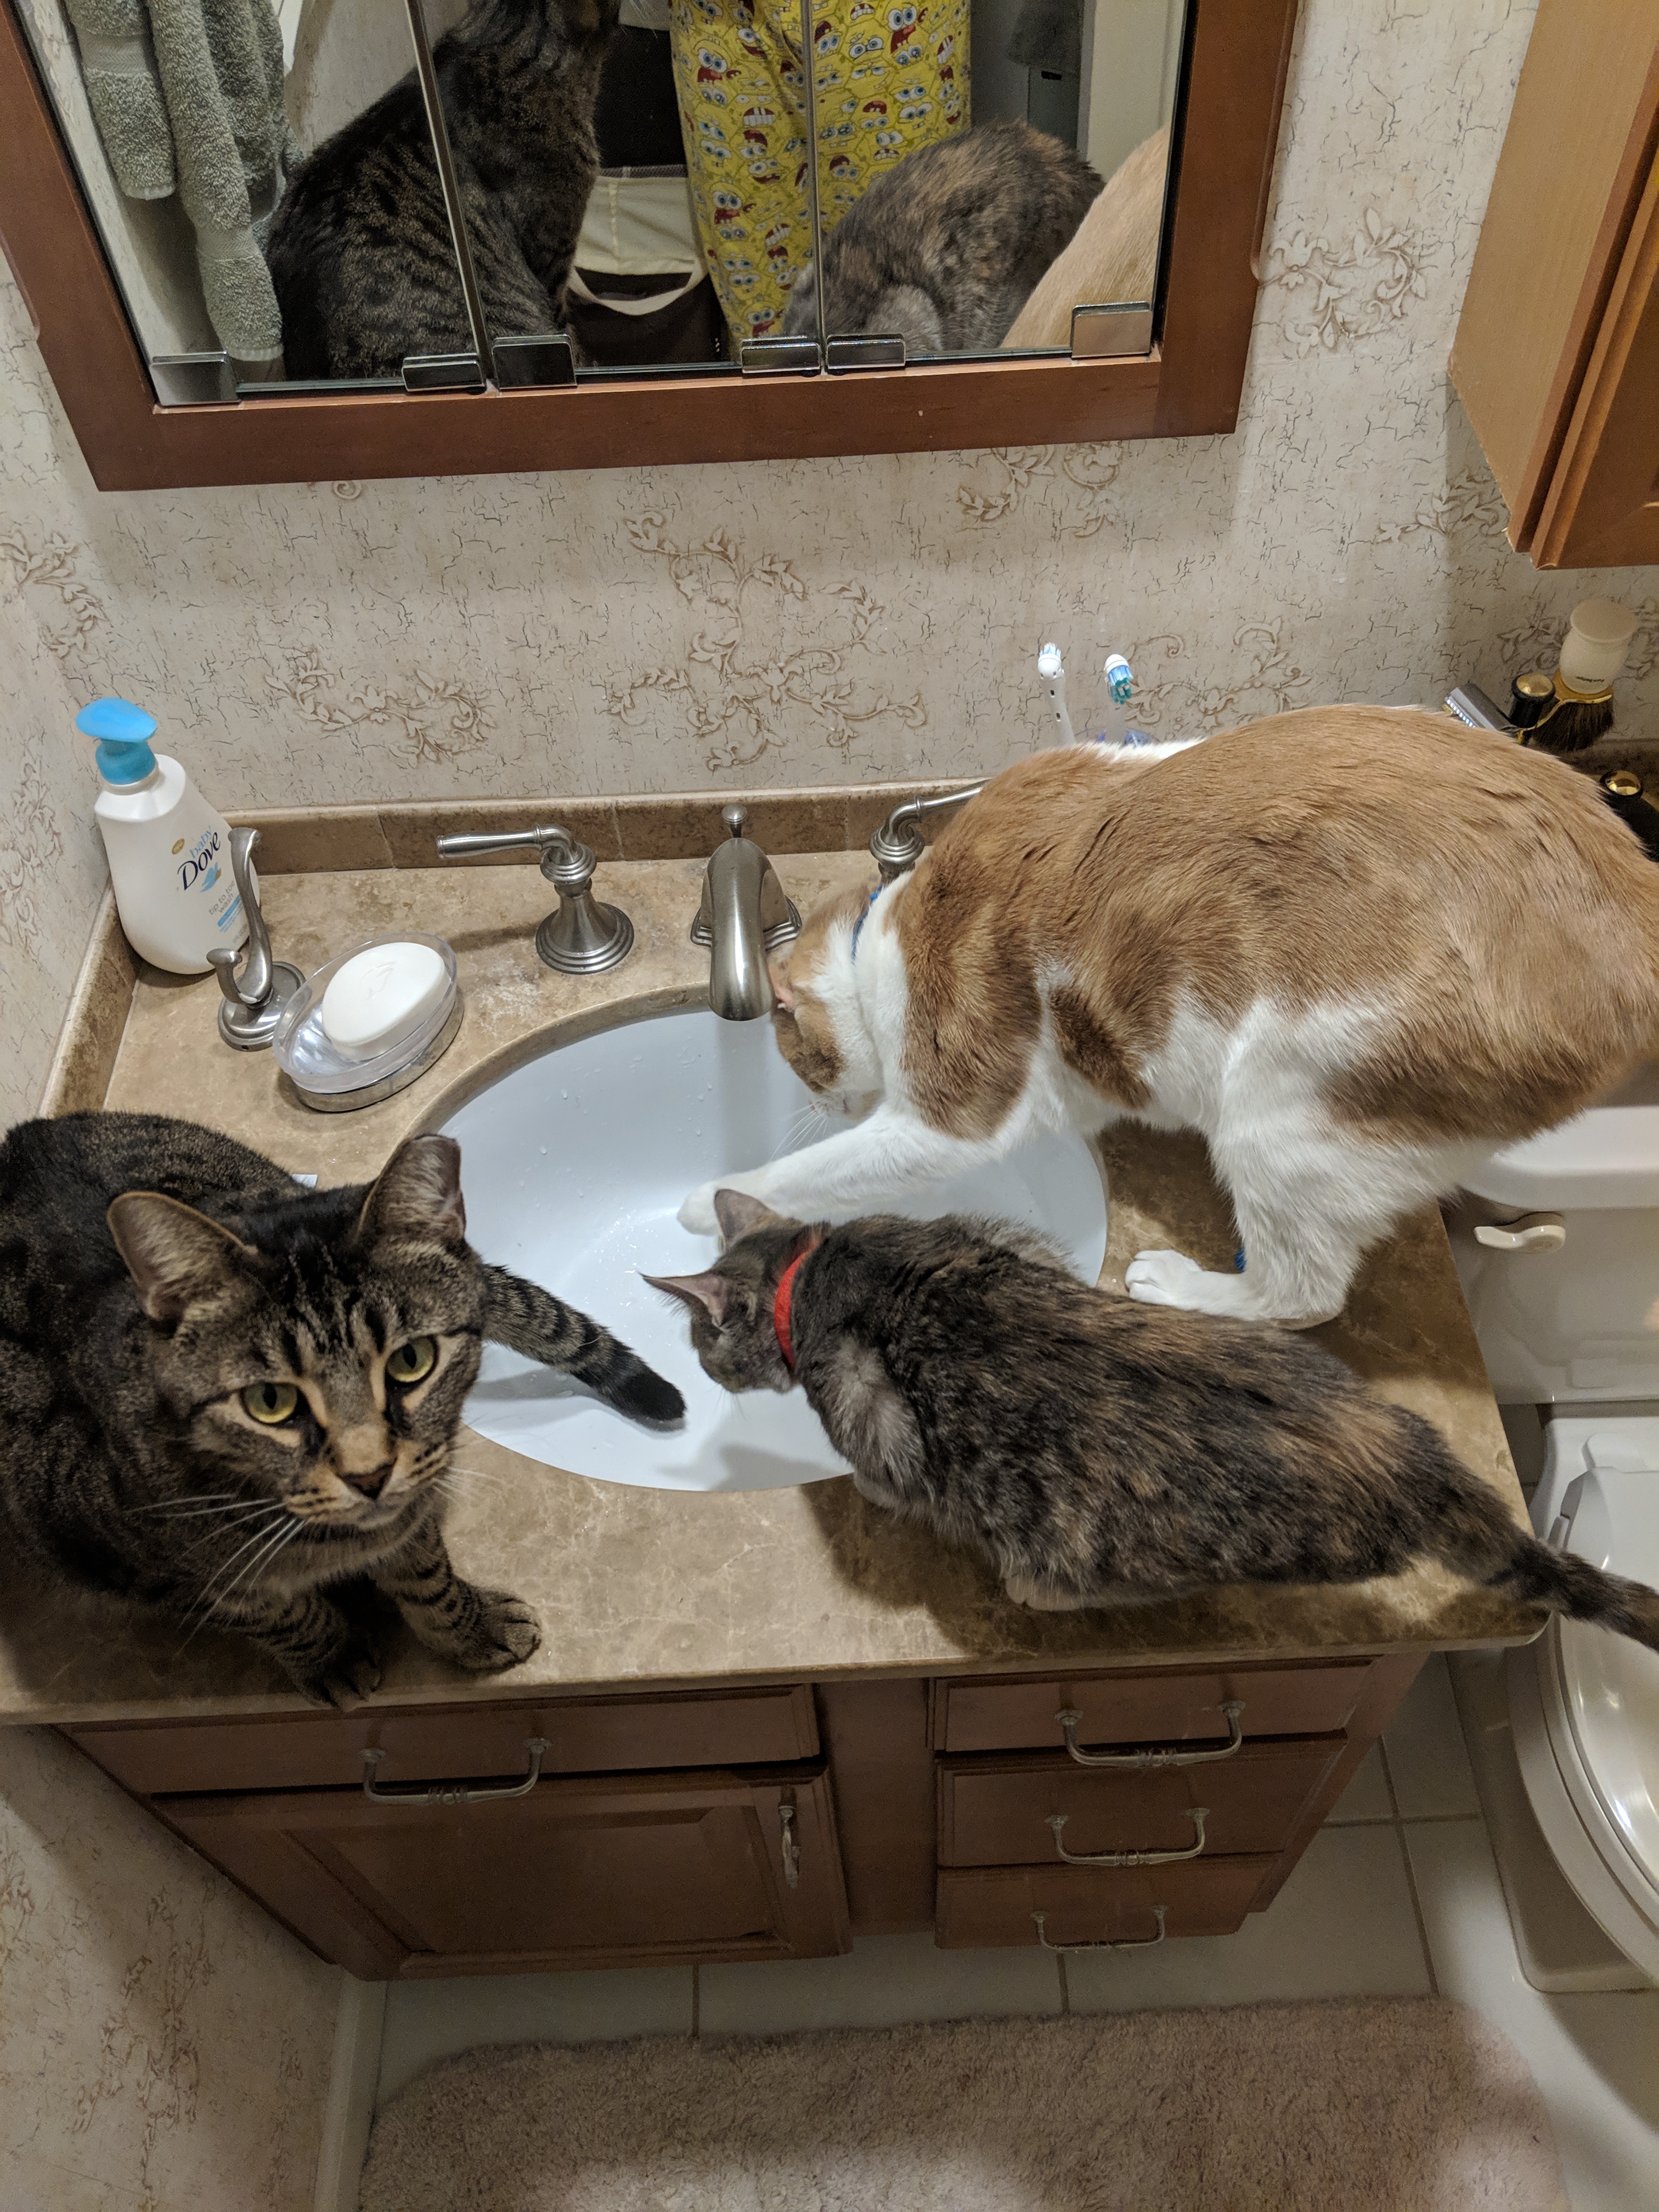 3 Cats and a Sink